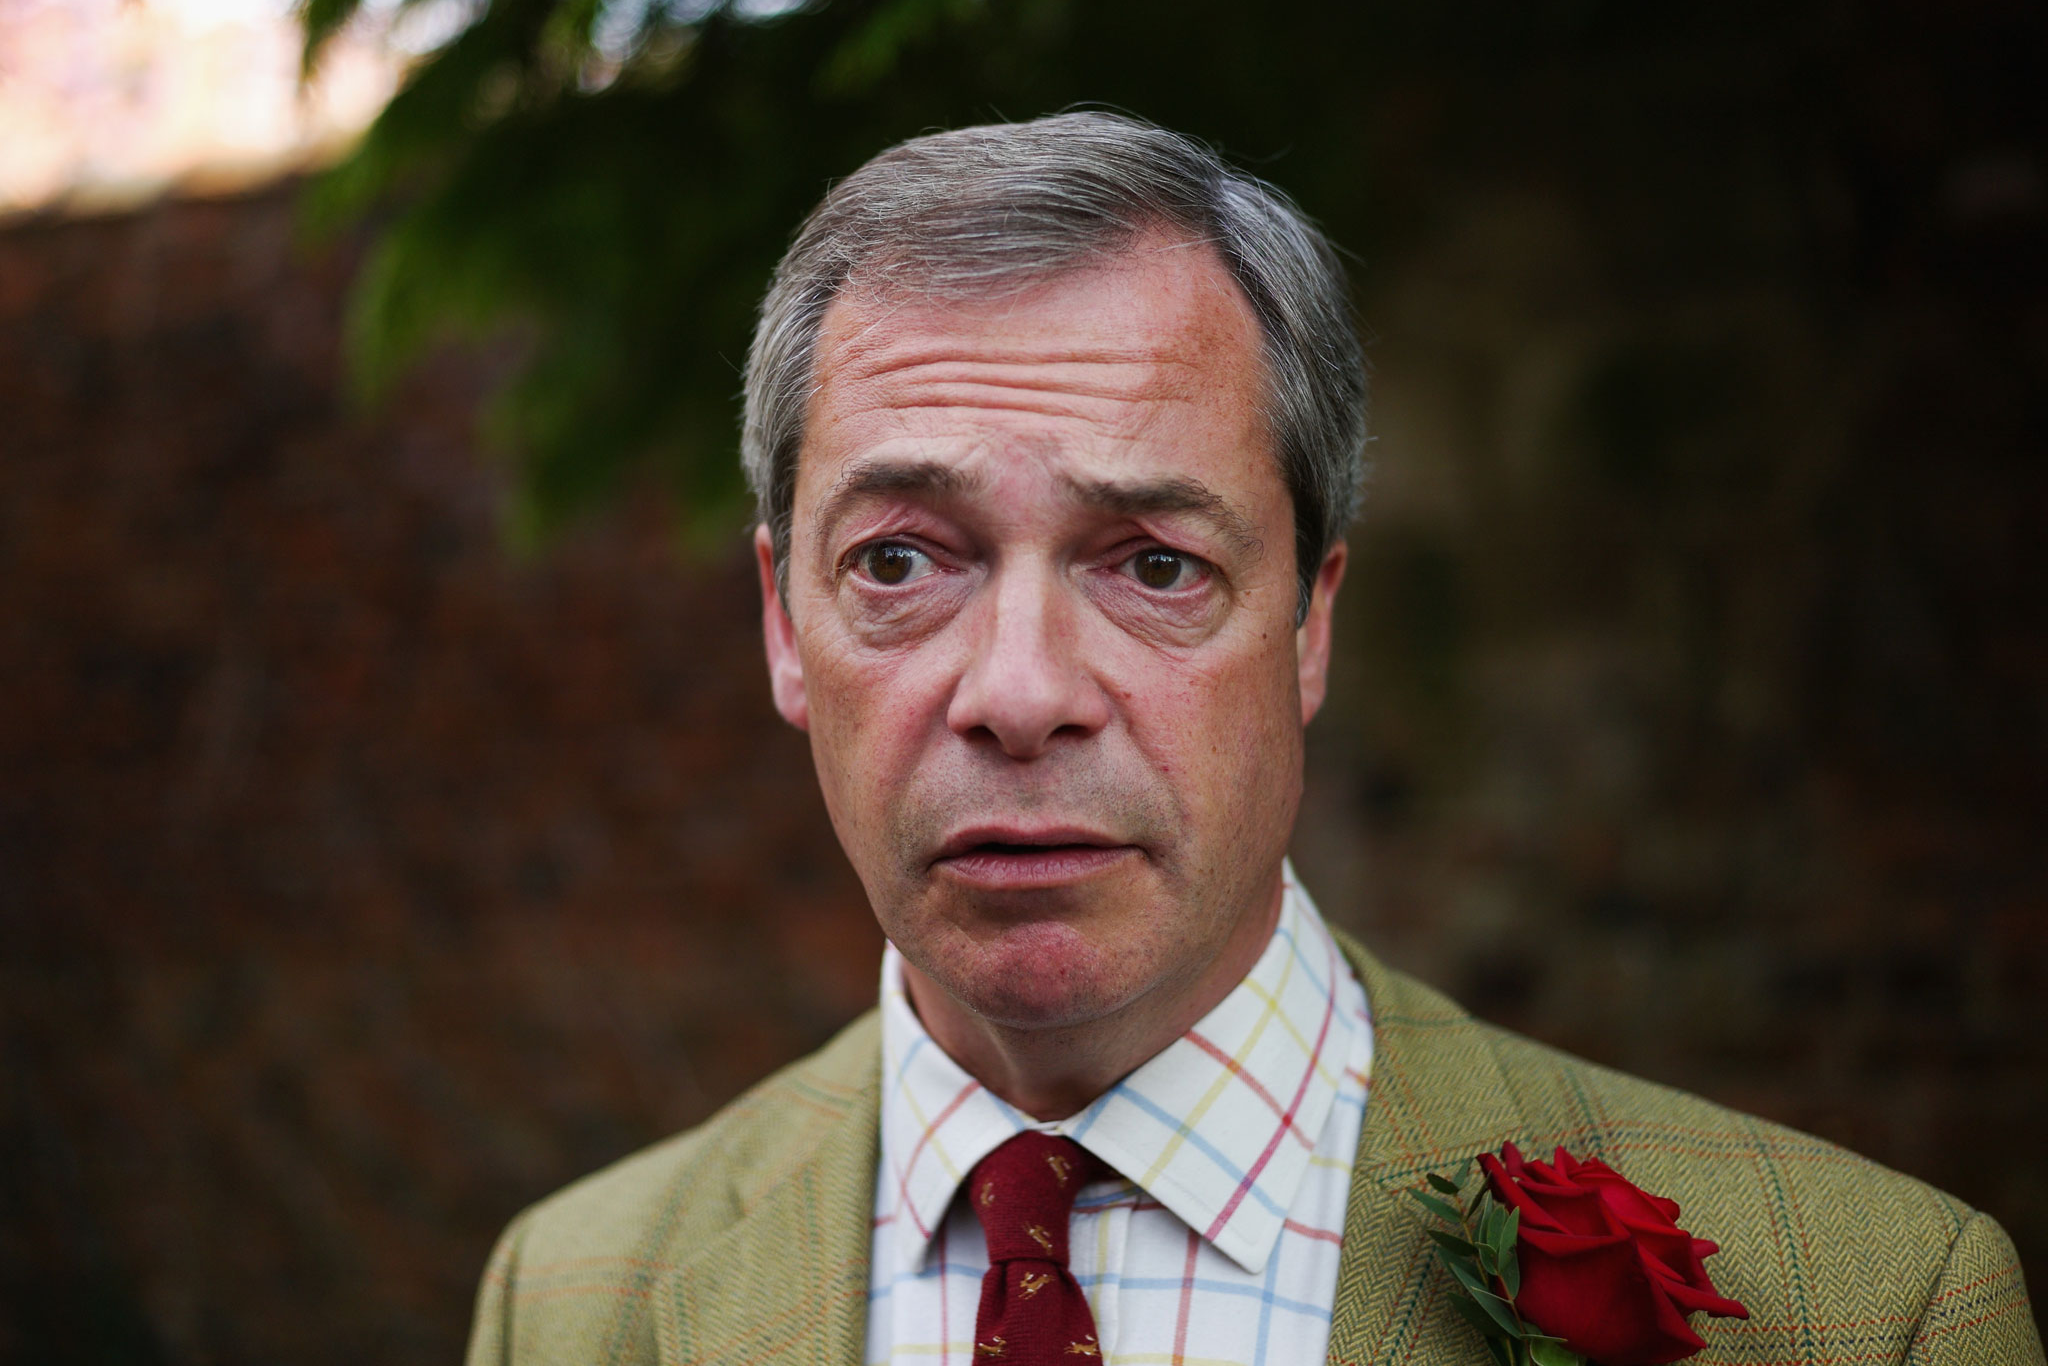 Sorry Nigel Farage, but the Red Cross want nothing to do with Ukip